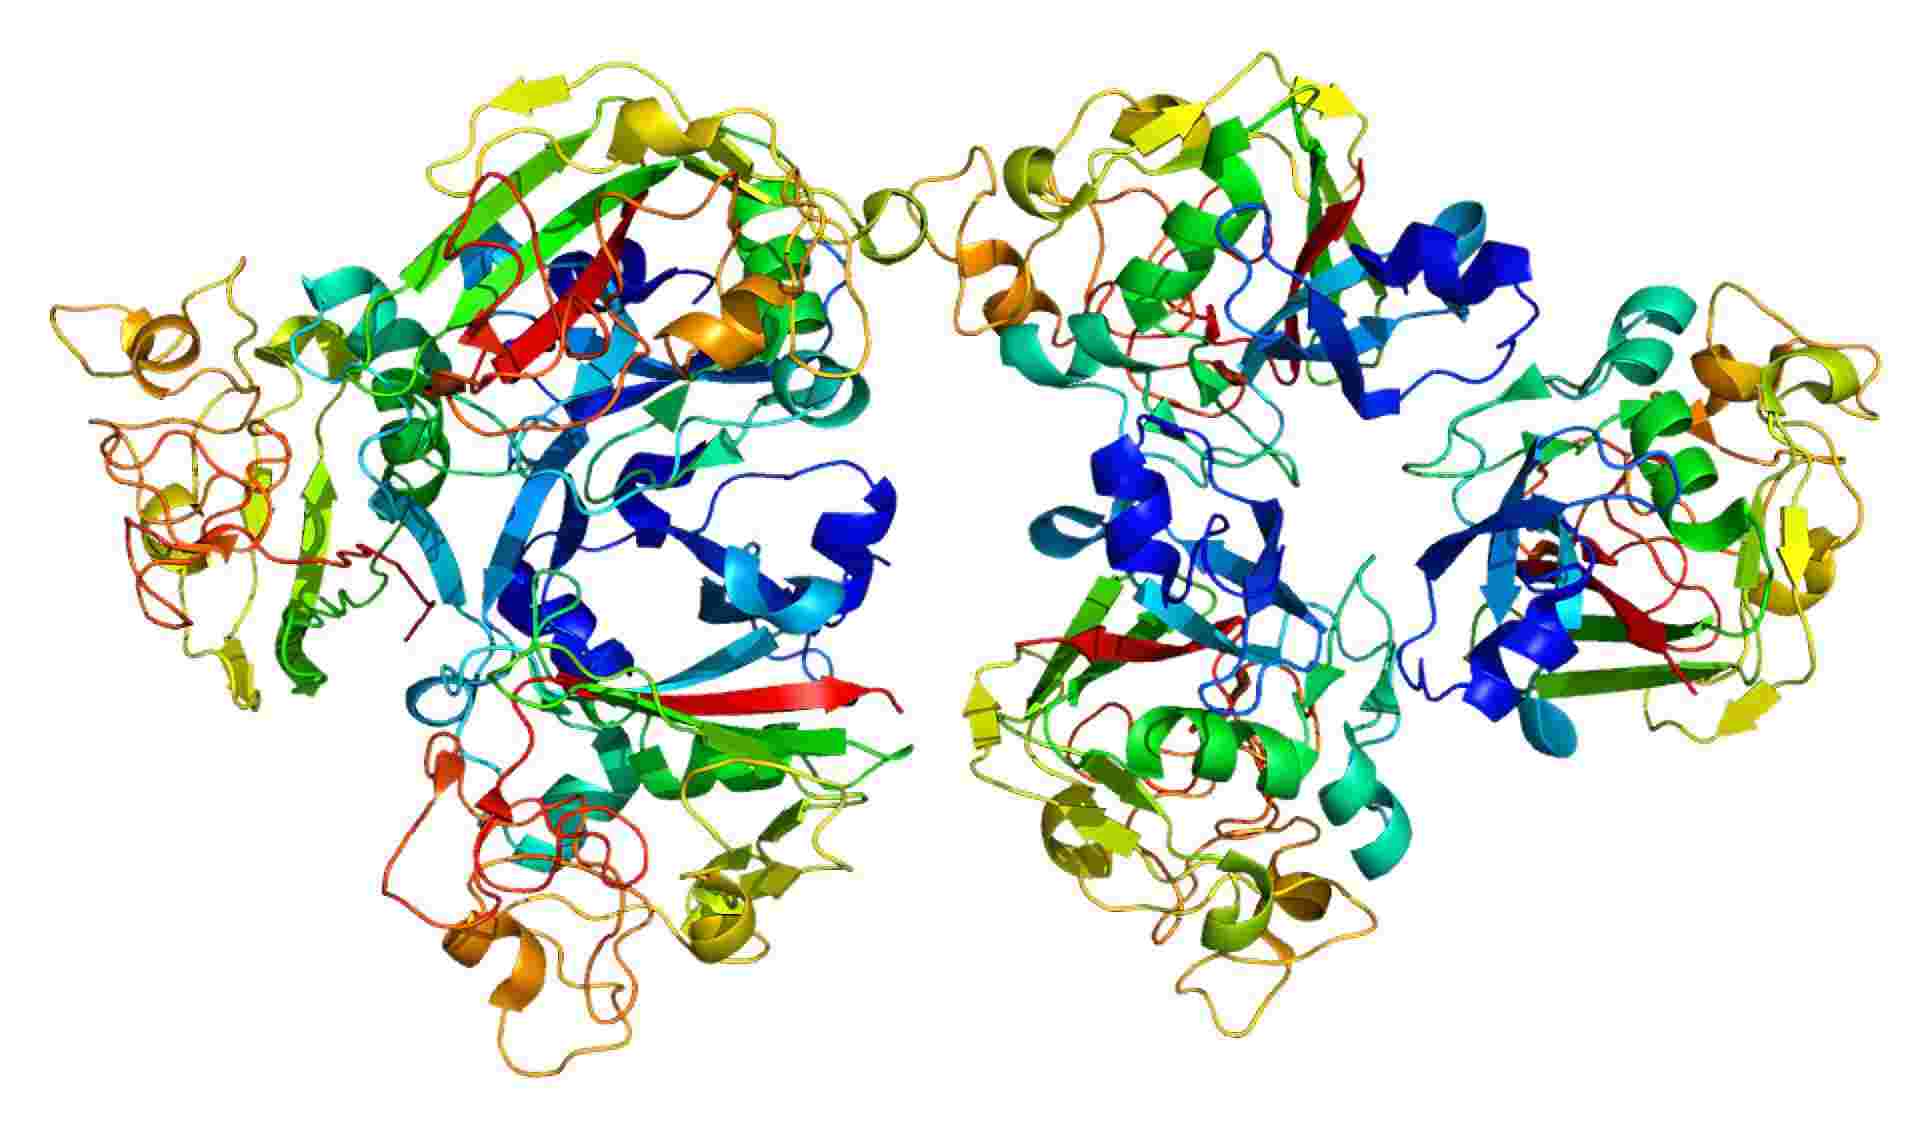 Fig. 1 L-ficolin structure. （By Emw - Own work, https://commons.wikimedia.org/wiki/File:Protein_FCN2_PDB_2j0g.png)